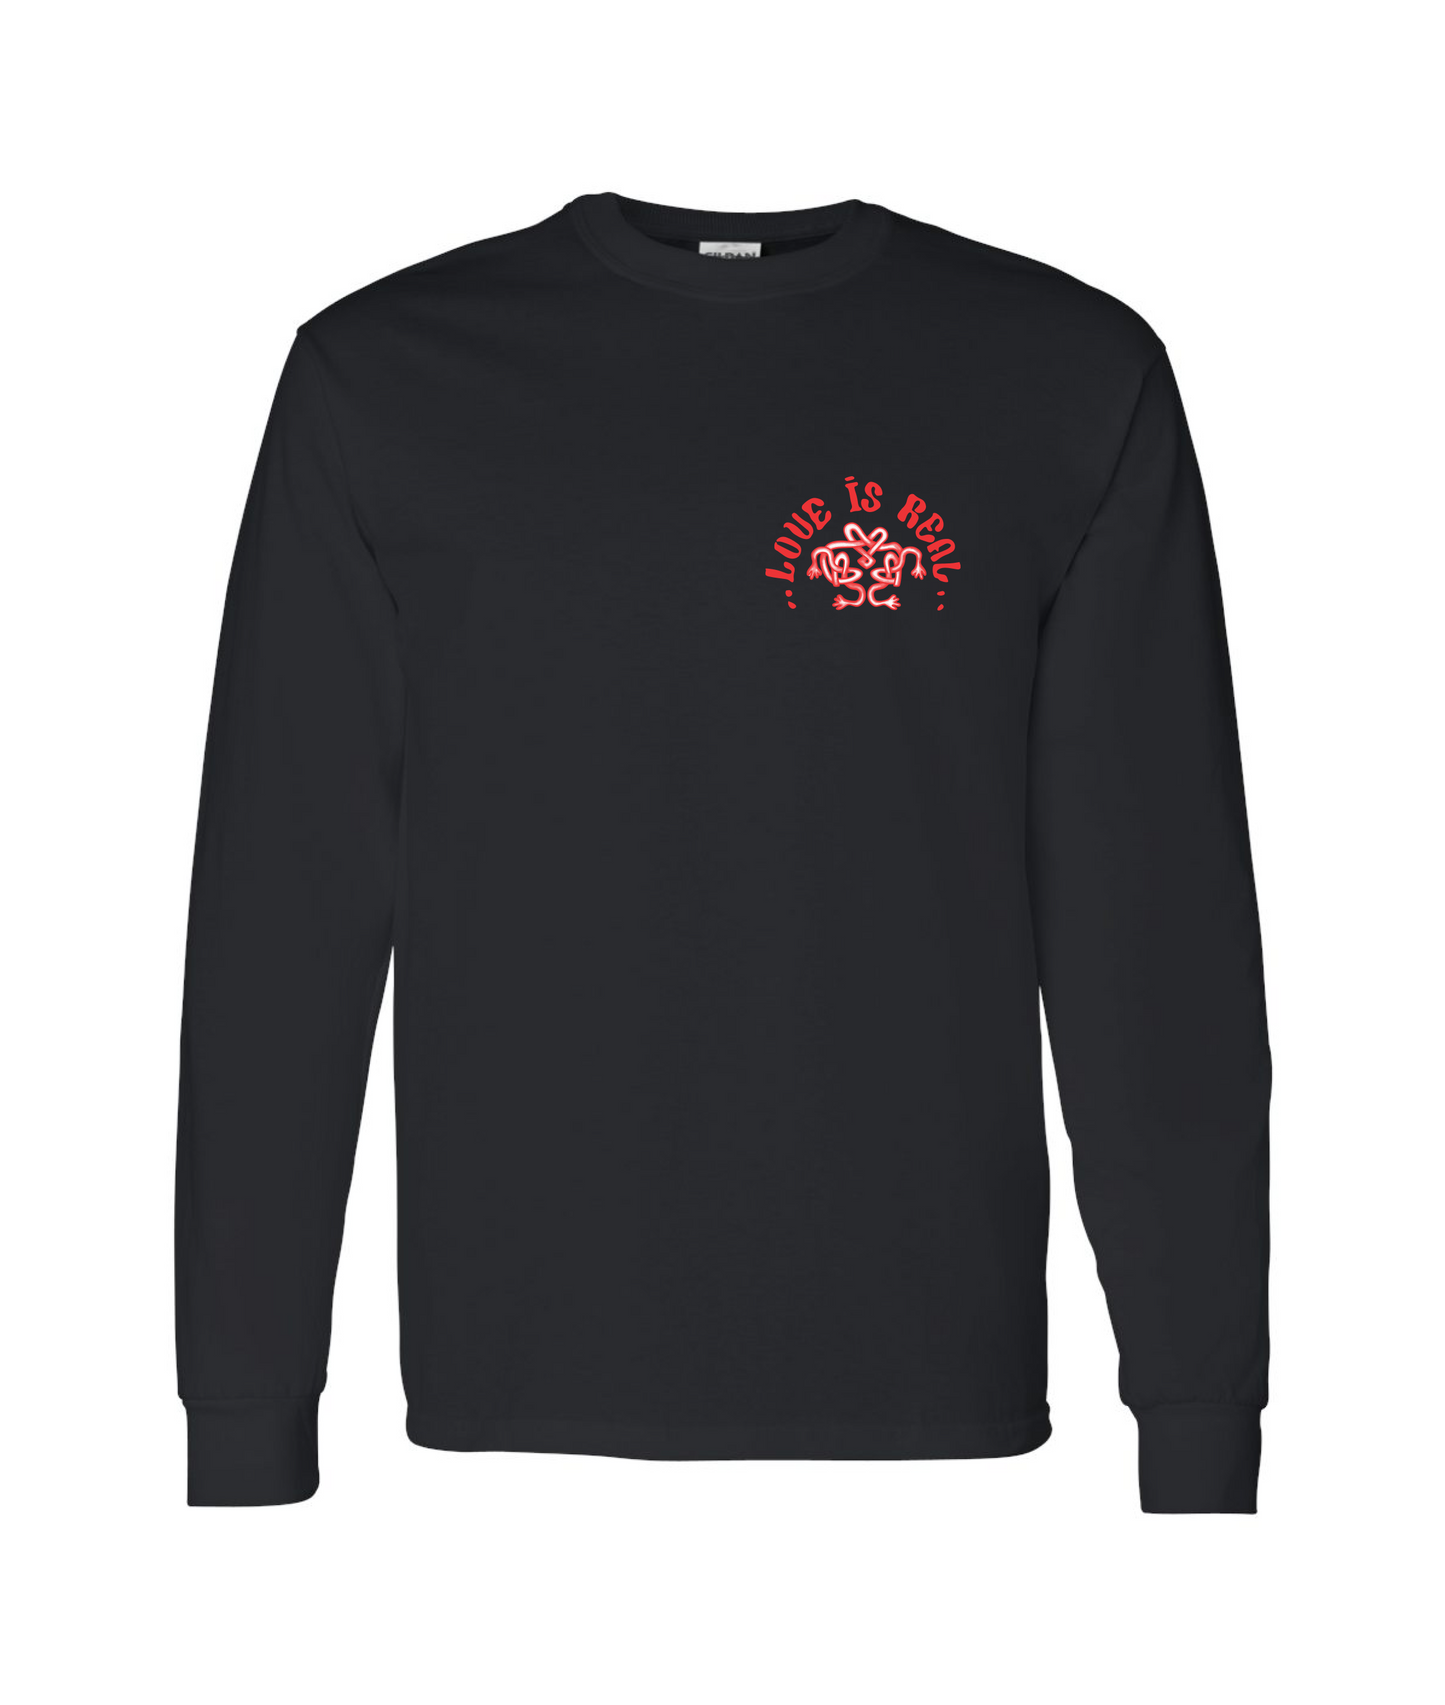 LOVE IS REAL - Logo w/White Highlights - Black Long Sleeve T